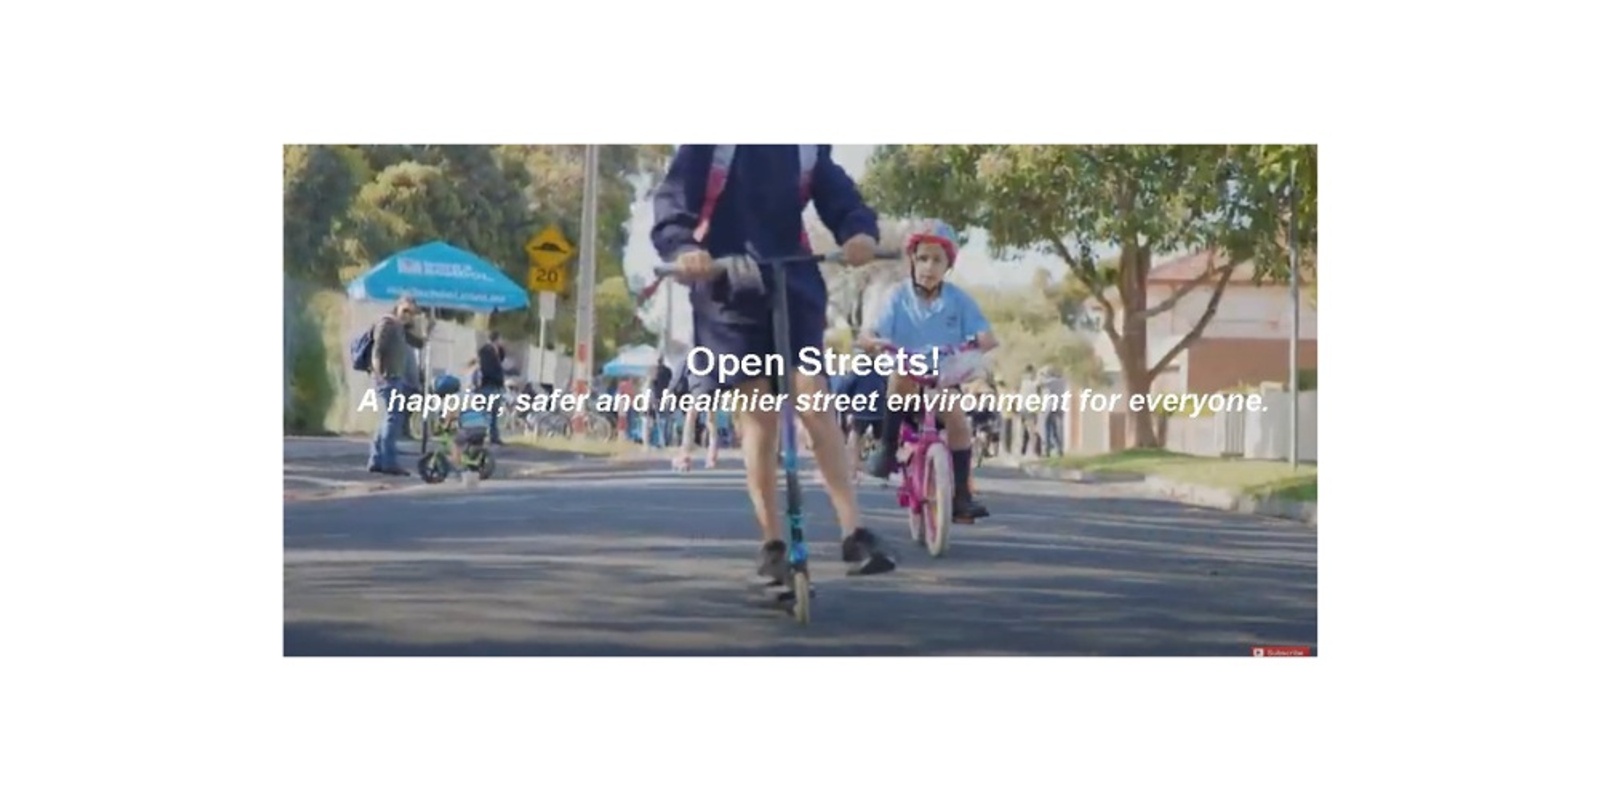 Community Chat - Open Streets & Riding to School - Please Note the event has been cancelled